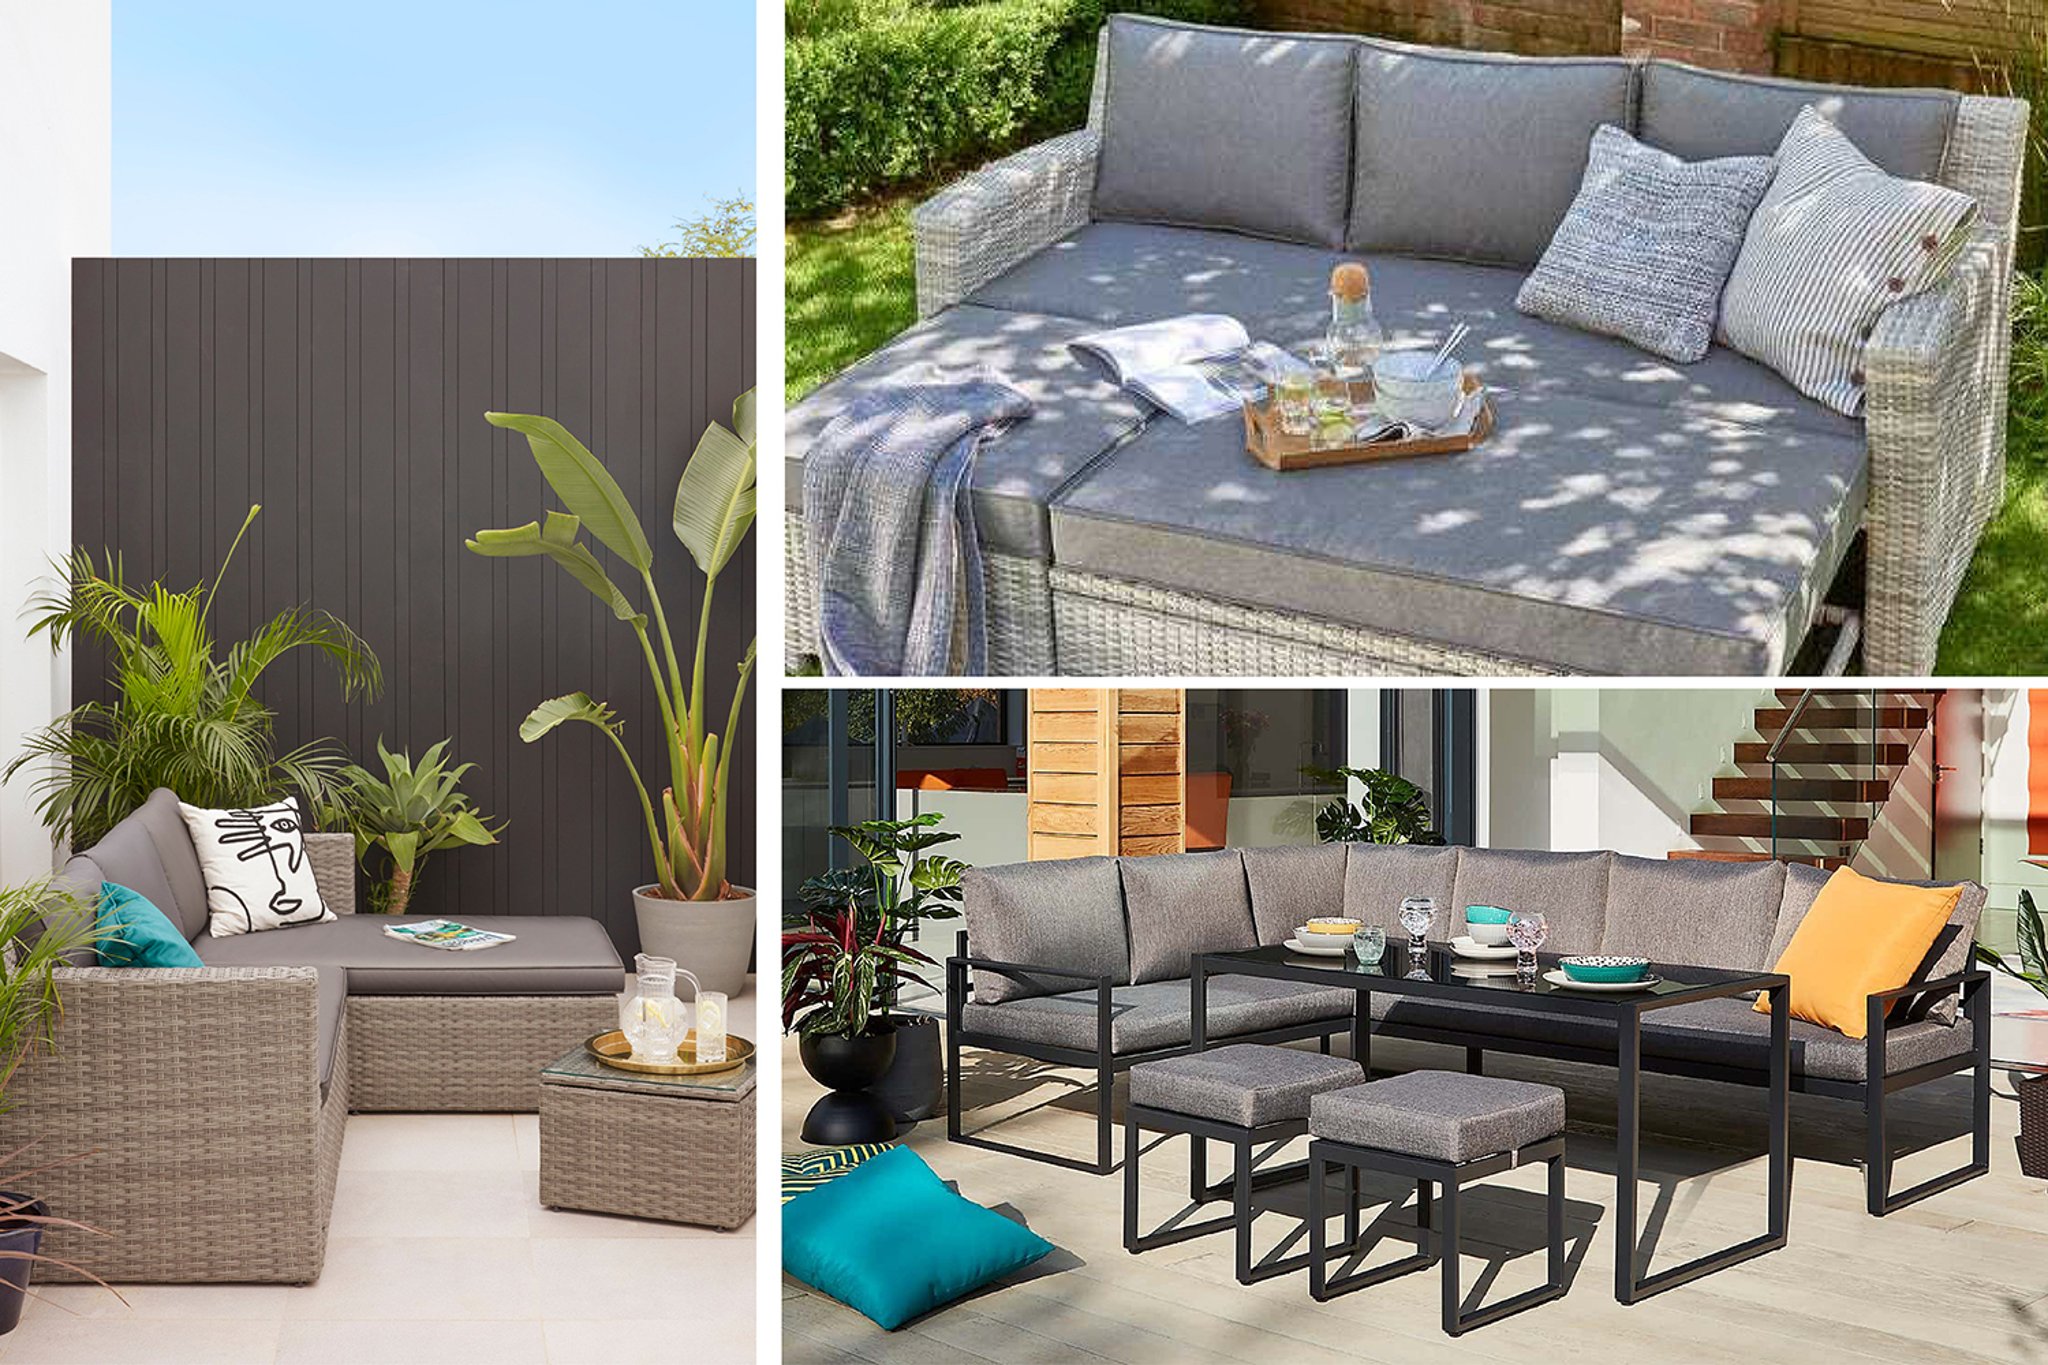 Best garden sofas UK: daybeds, corner sofas, and outdoor sofa sets